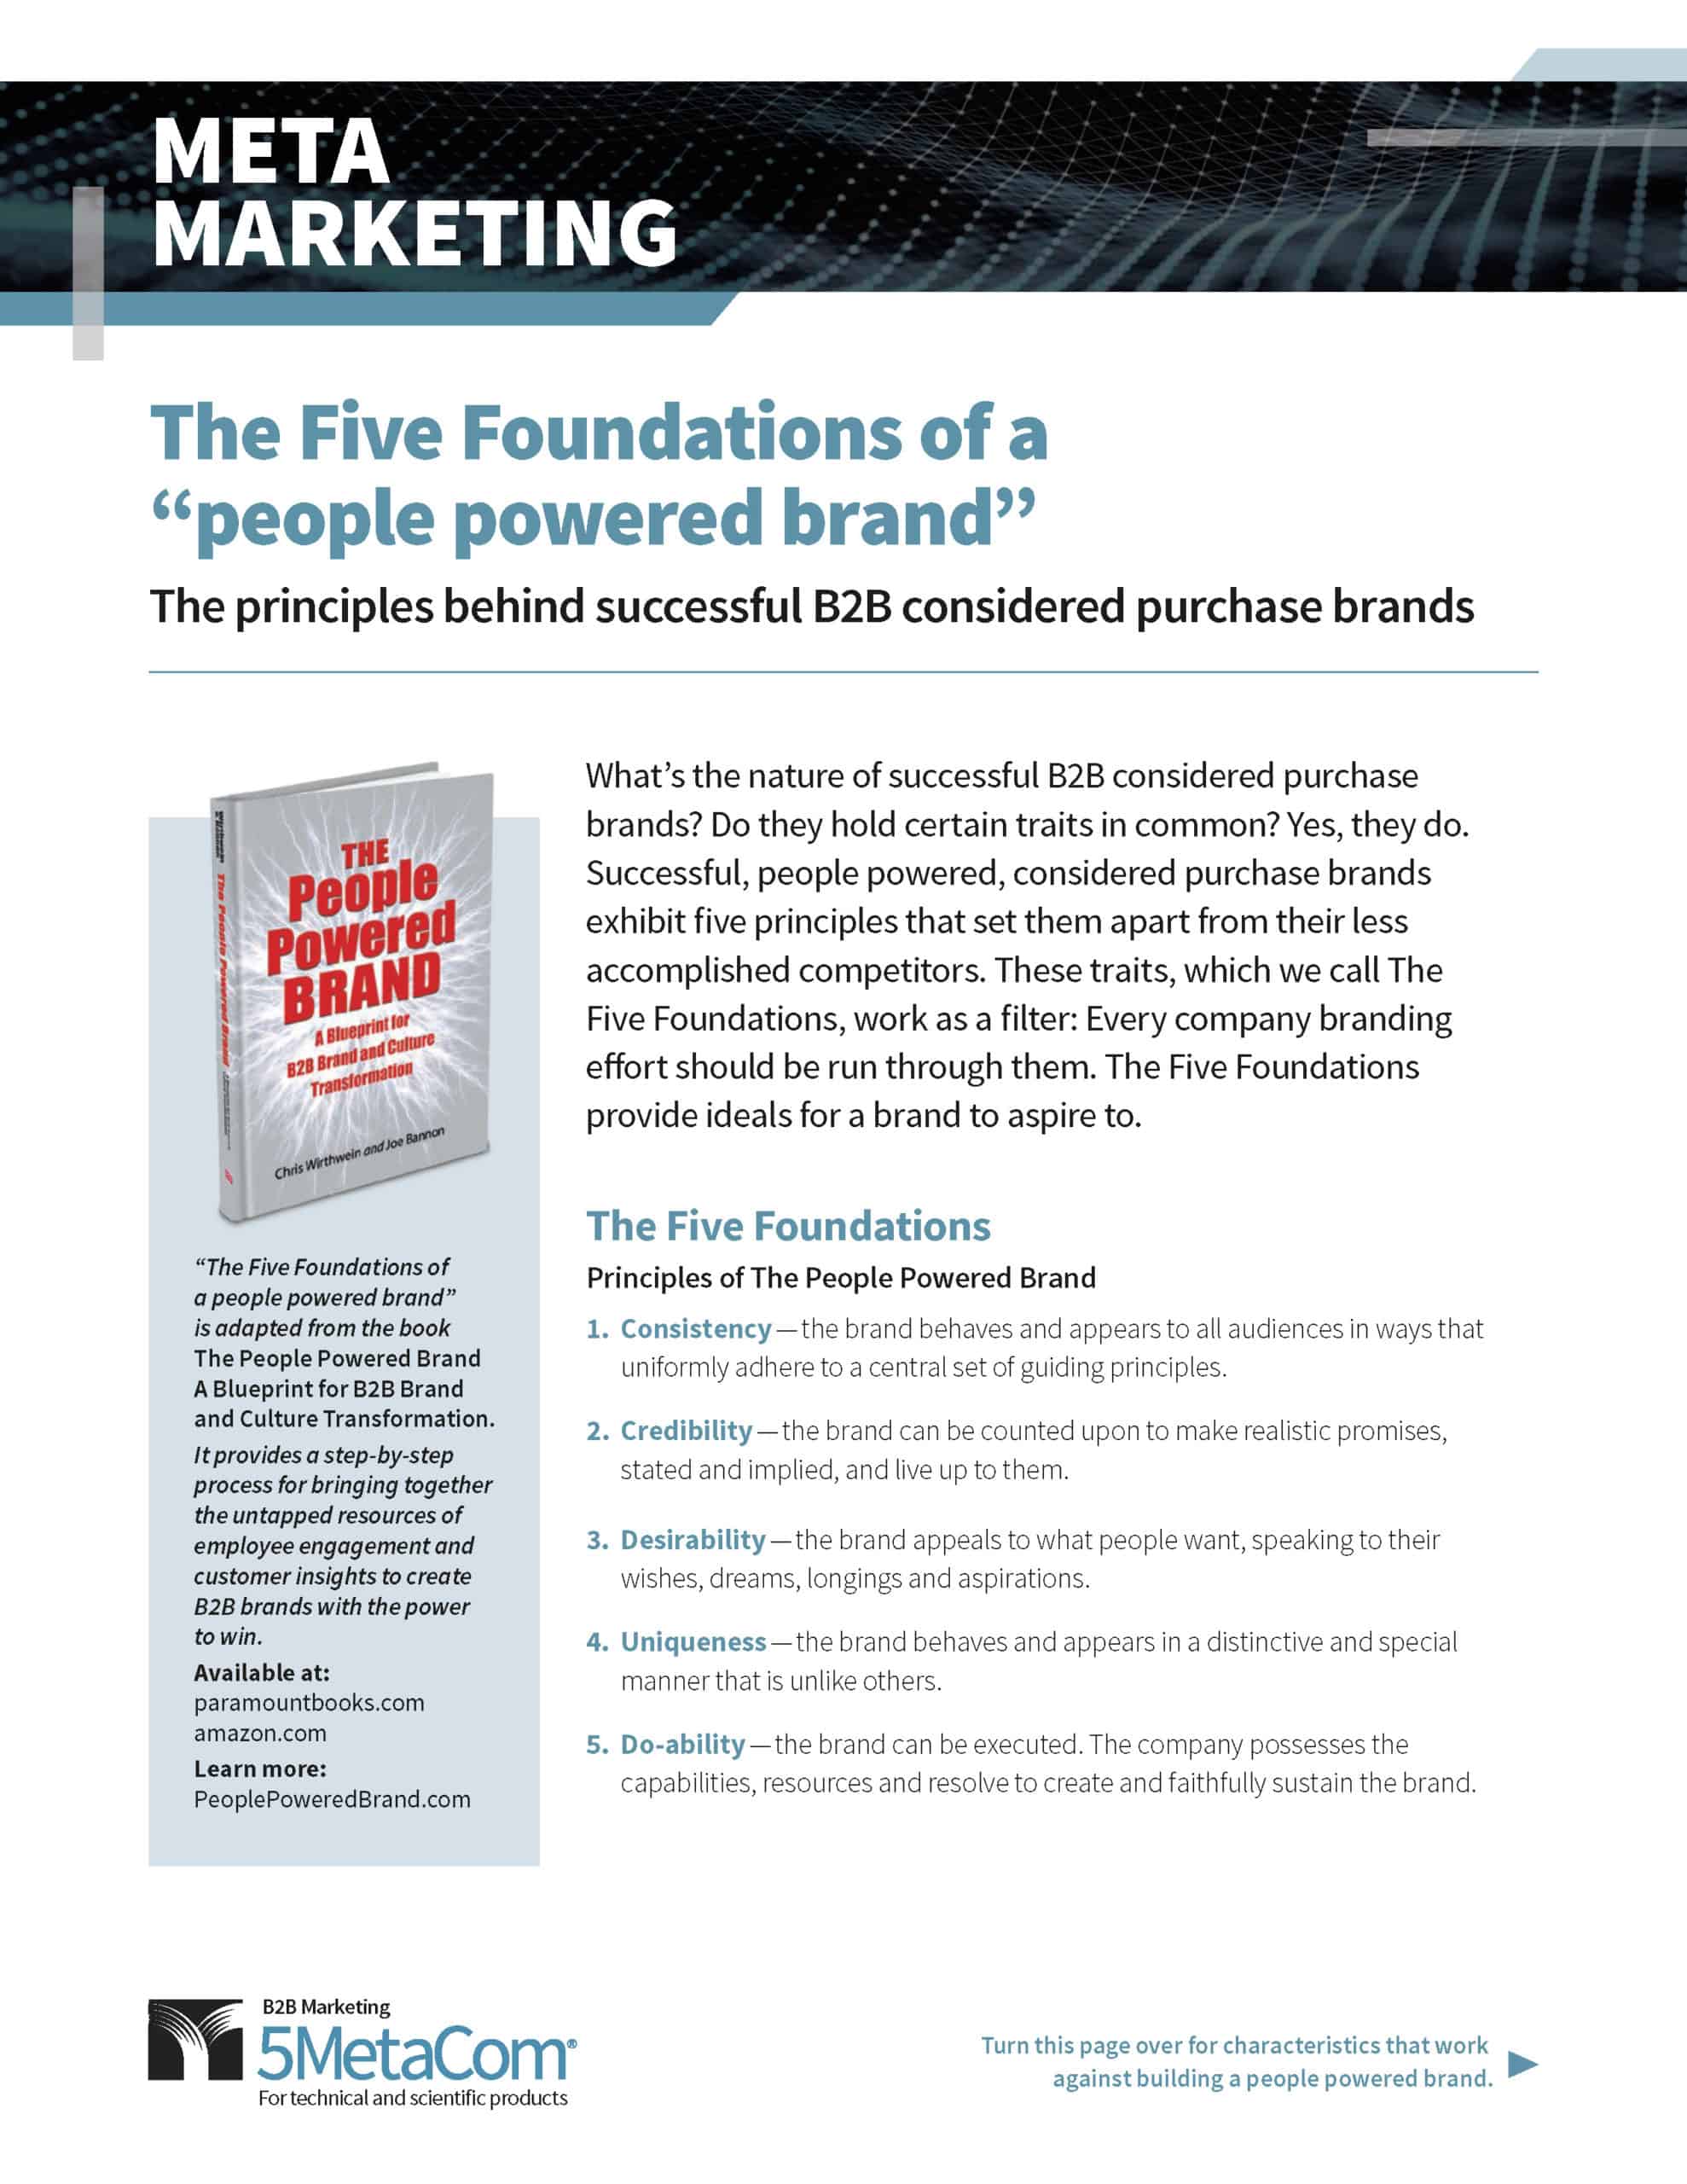 The Five Foundations of People Powered Brand